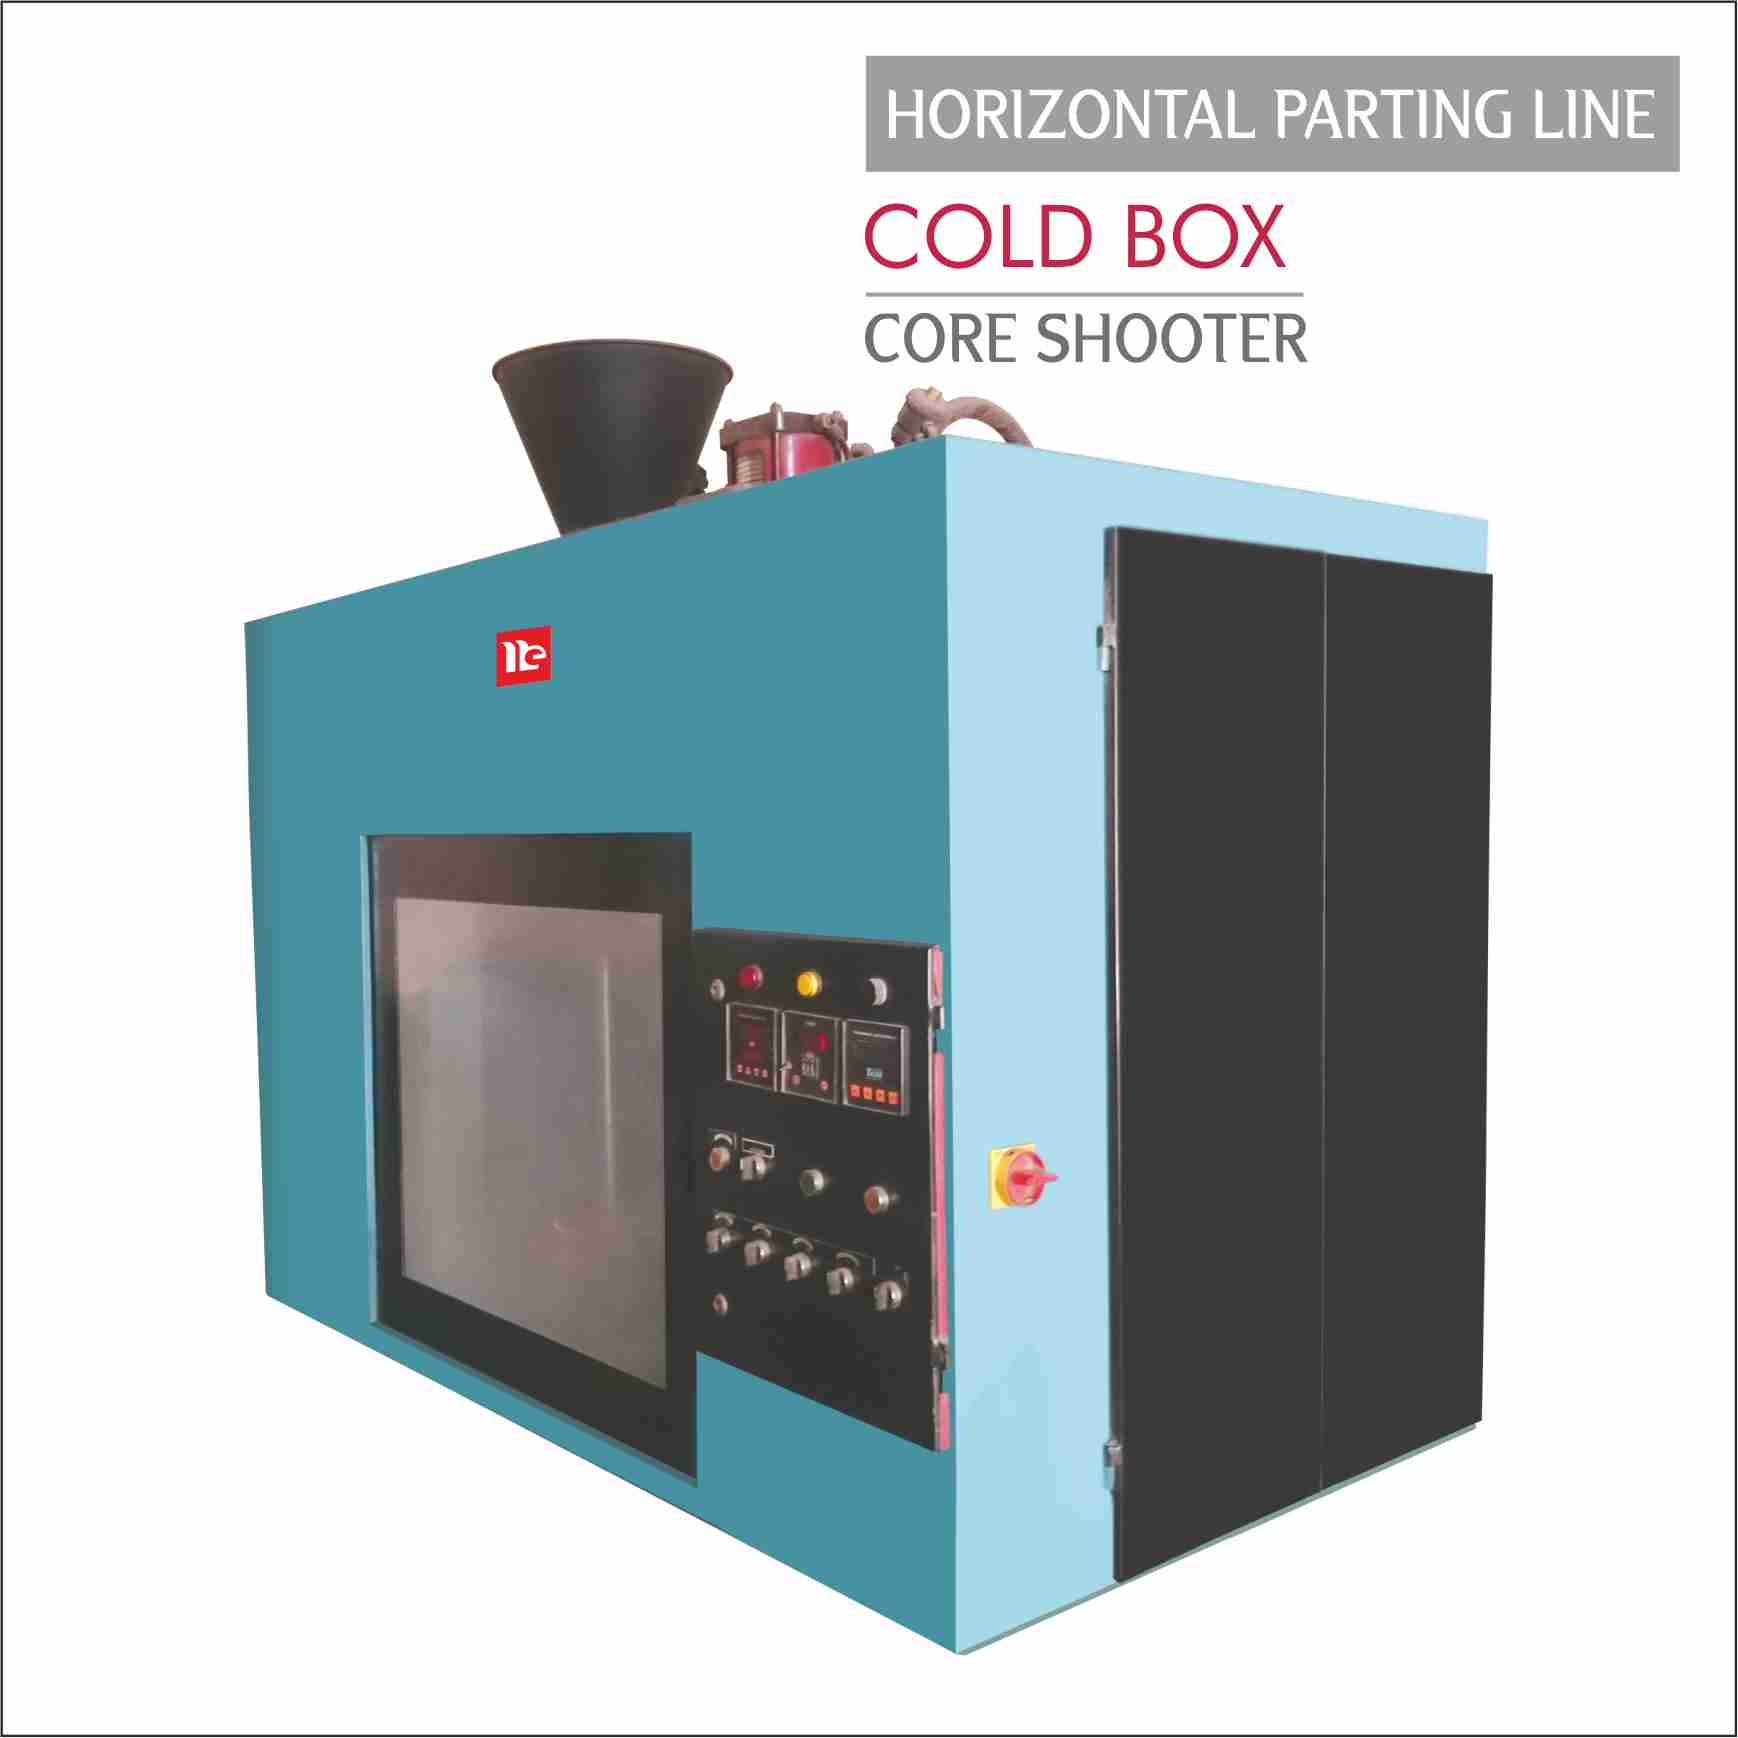 HORIZONTAL PARTING LINE COLD BOX CORE SHOOTER